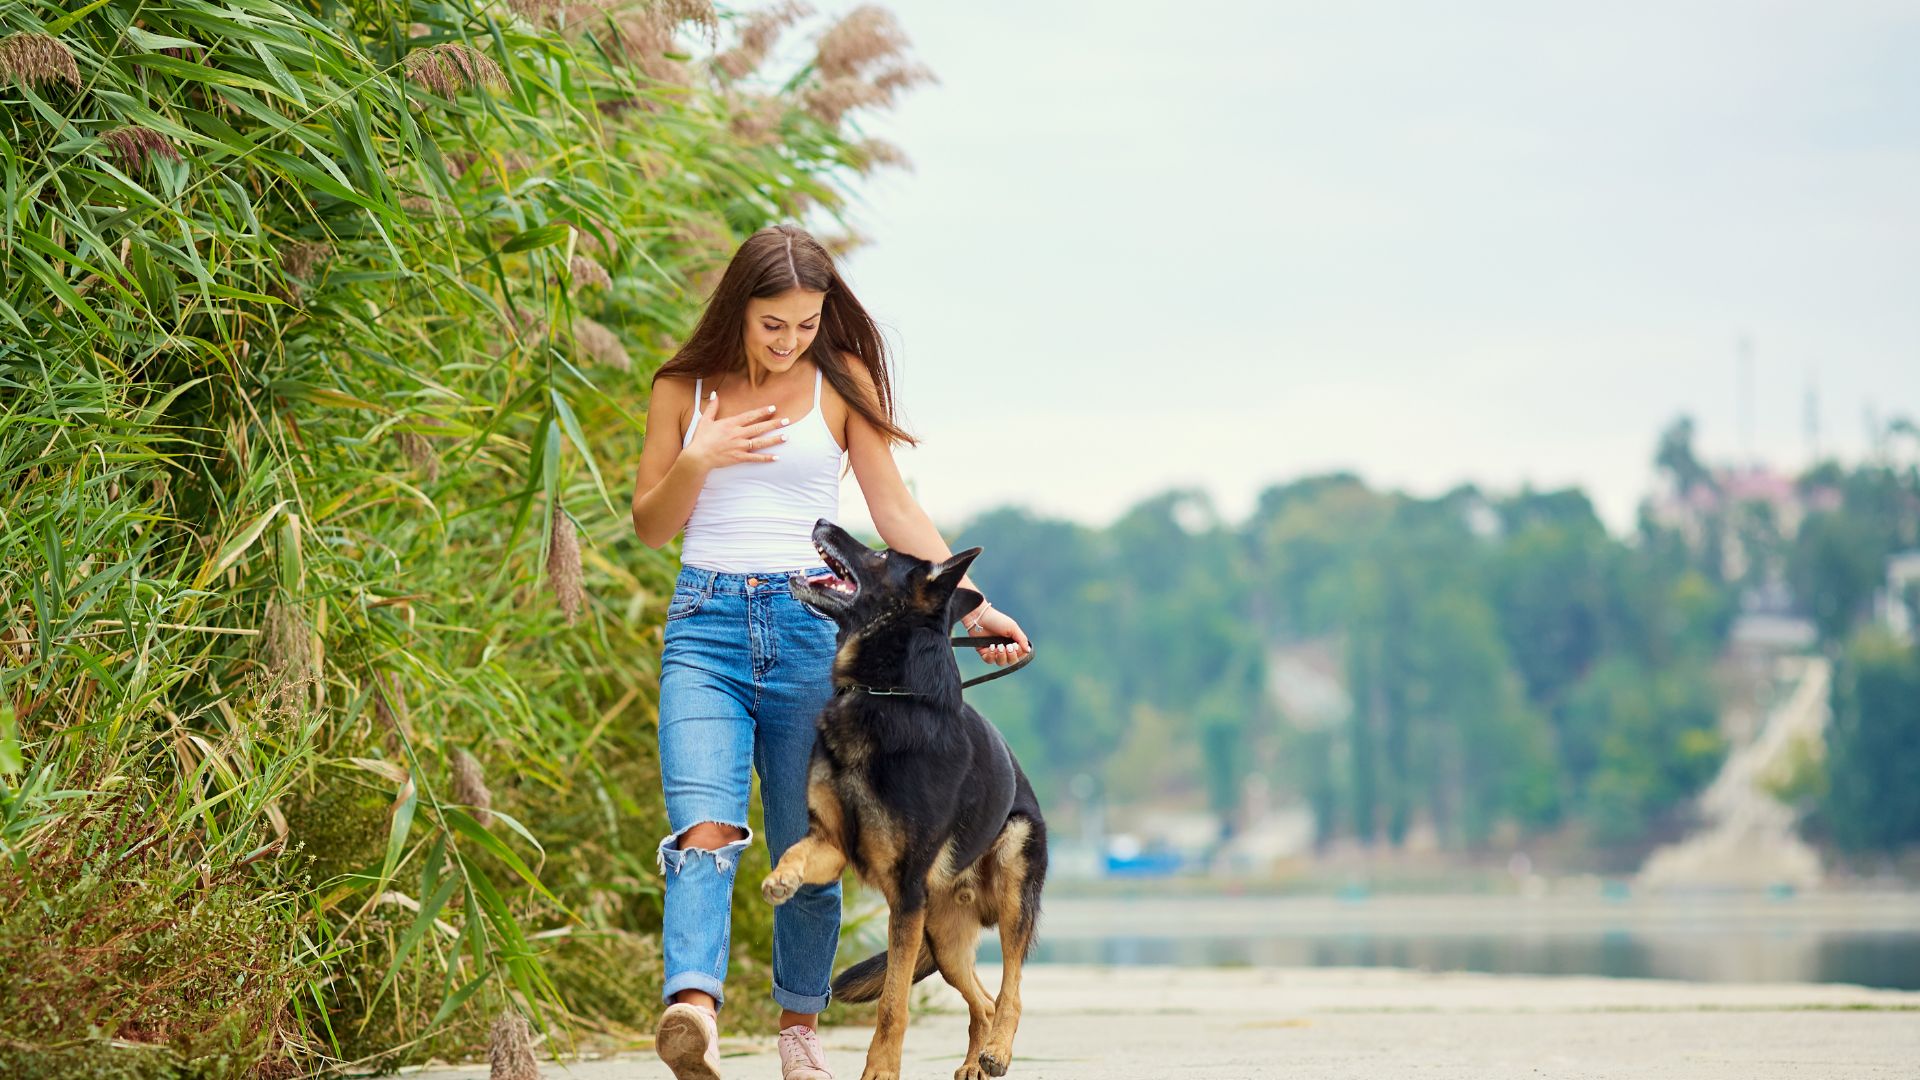 Your dog learns how to walk with leash training sessions